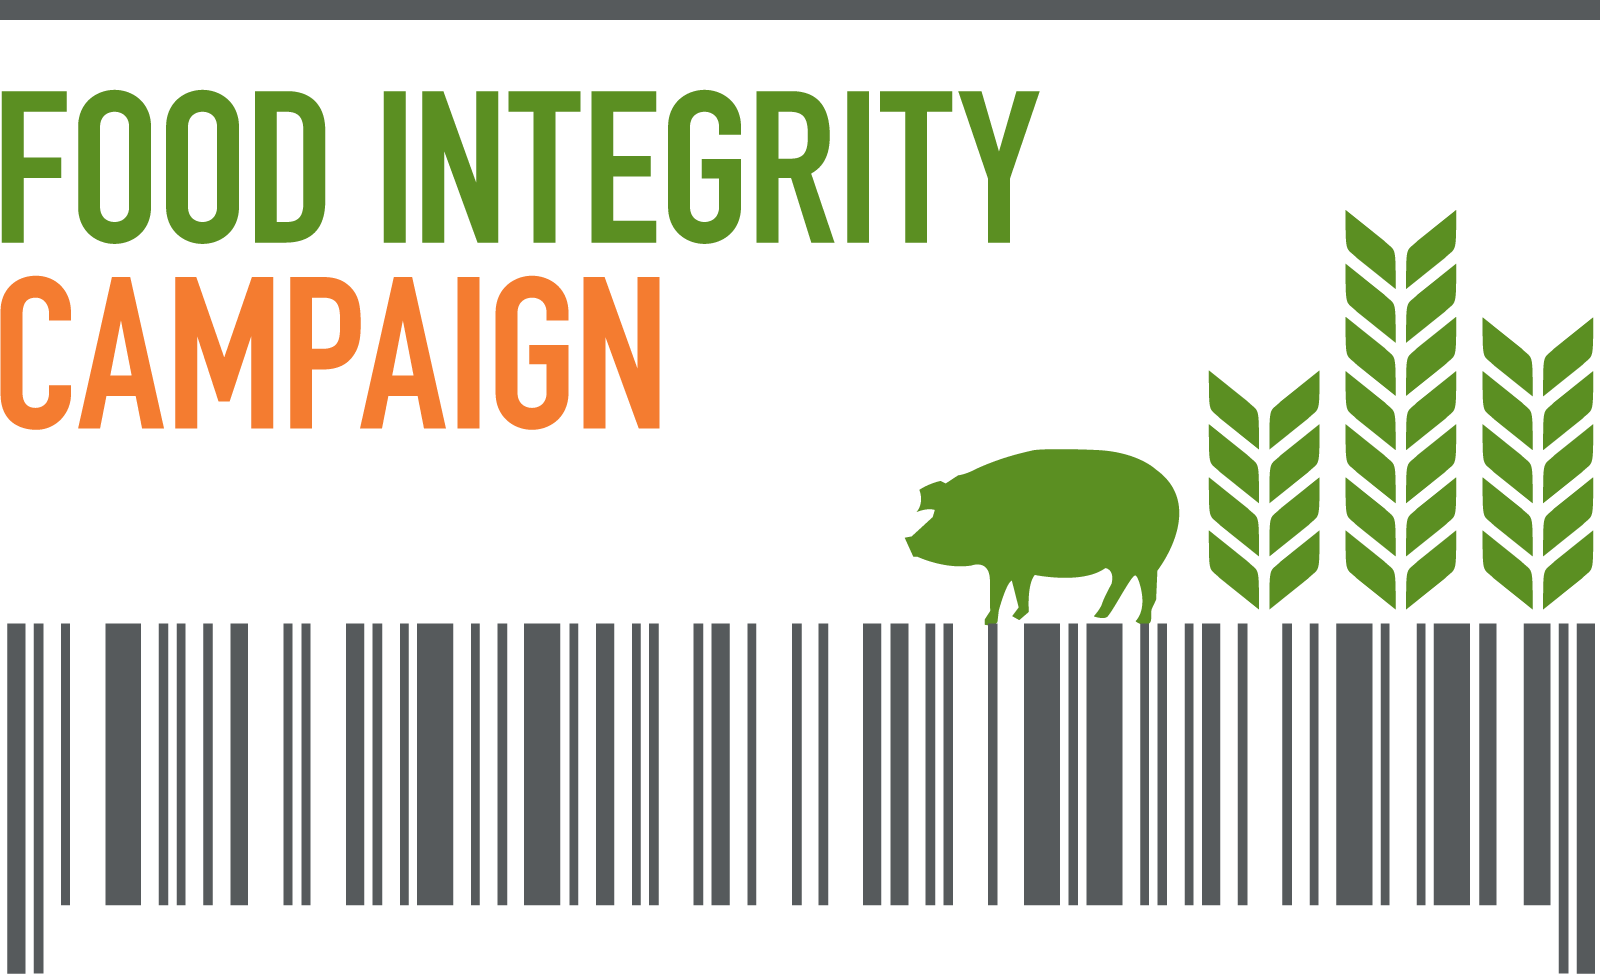 Food Integrity Campaign